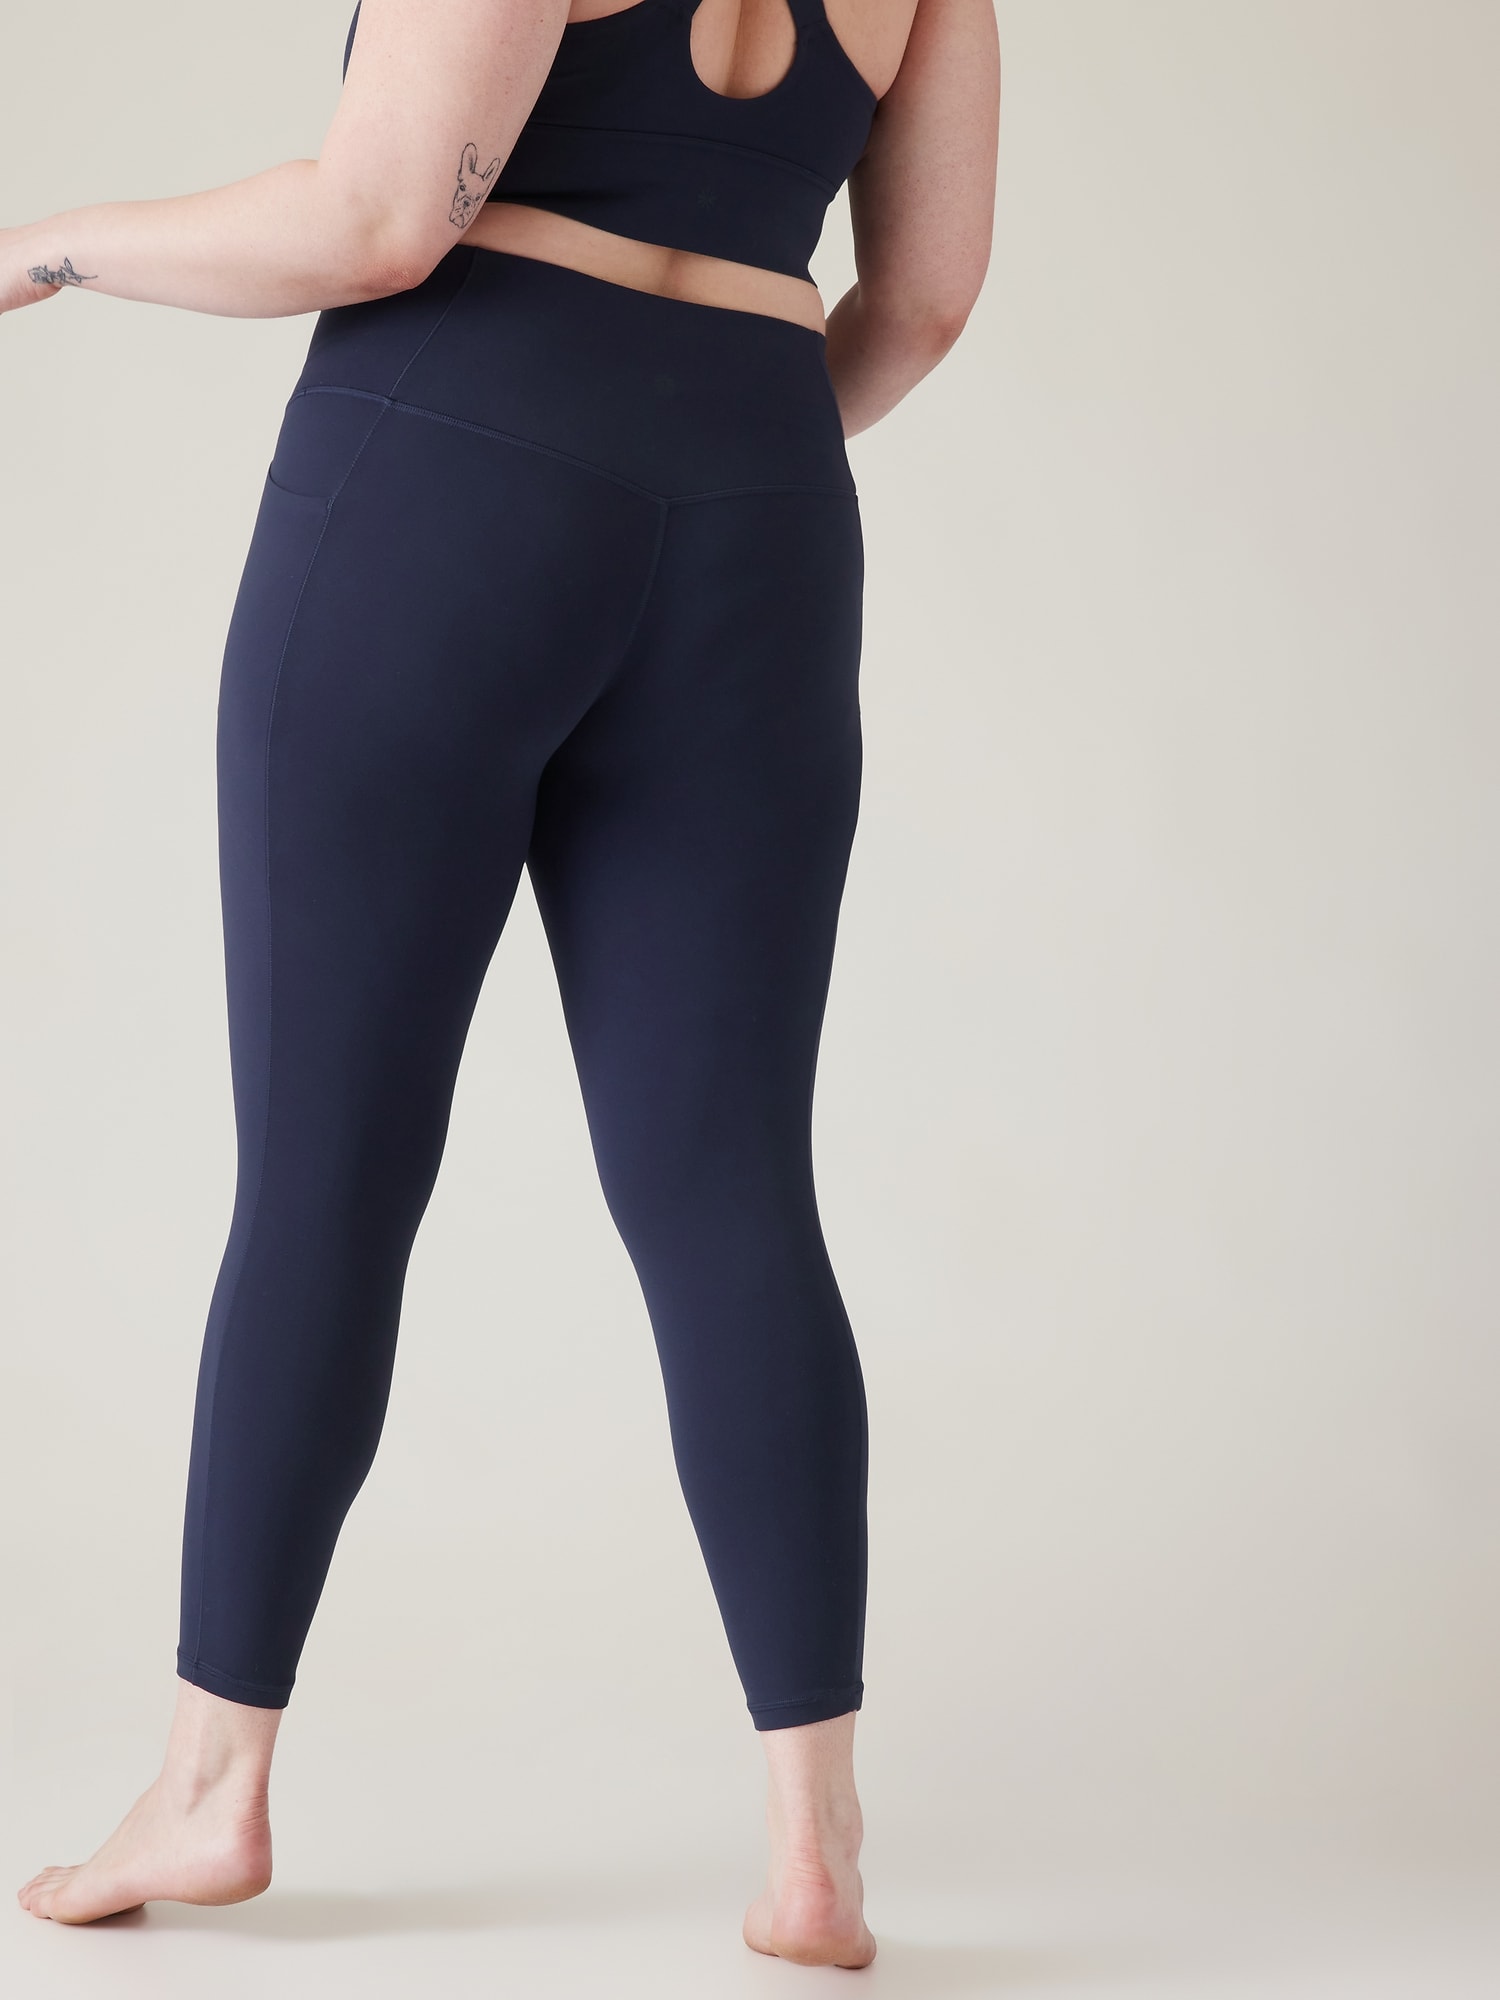 Satina High Waisted Leggings with Pockets Super Soft | Reg & Plus Size  (Plus Size, Navy)